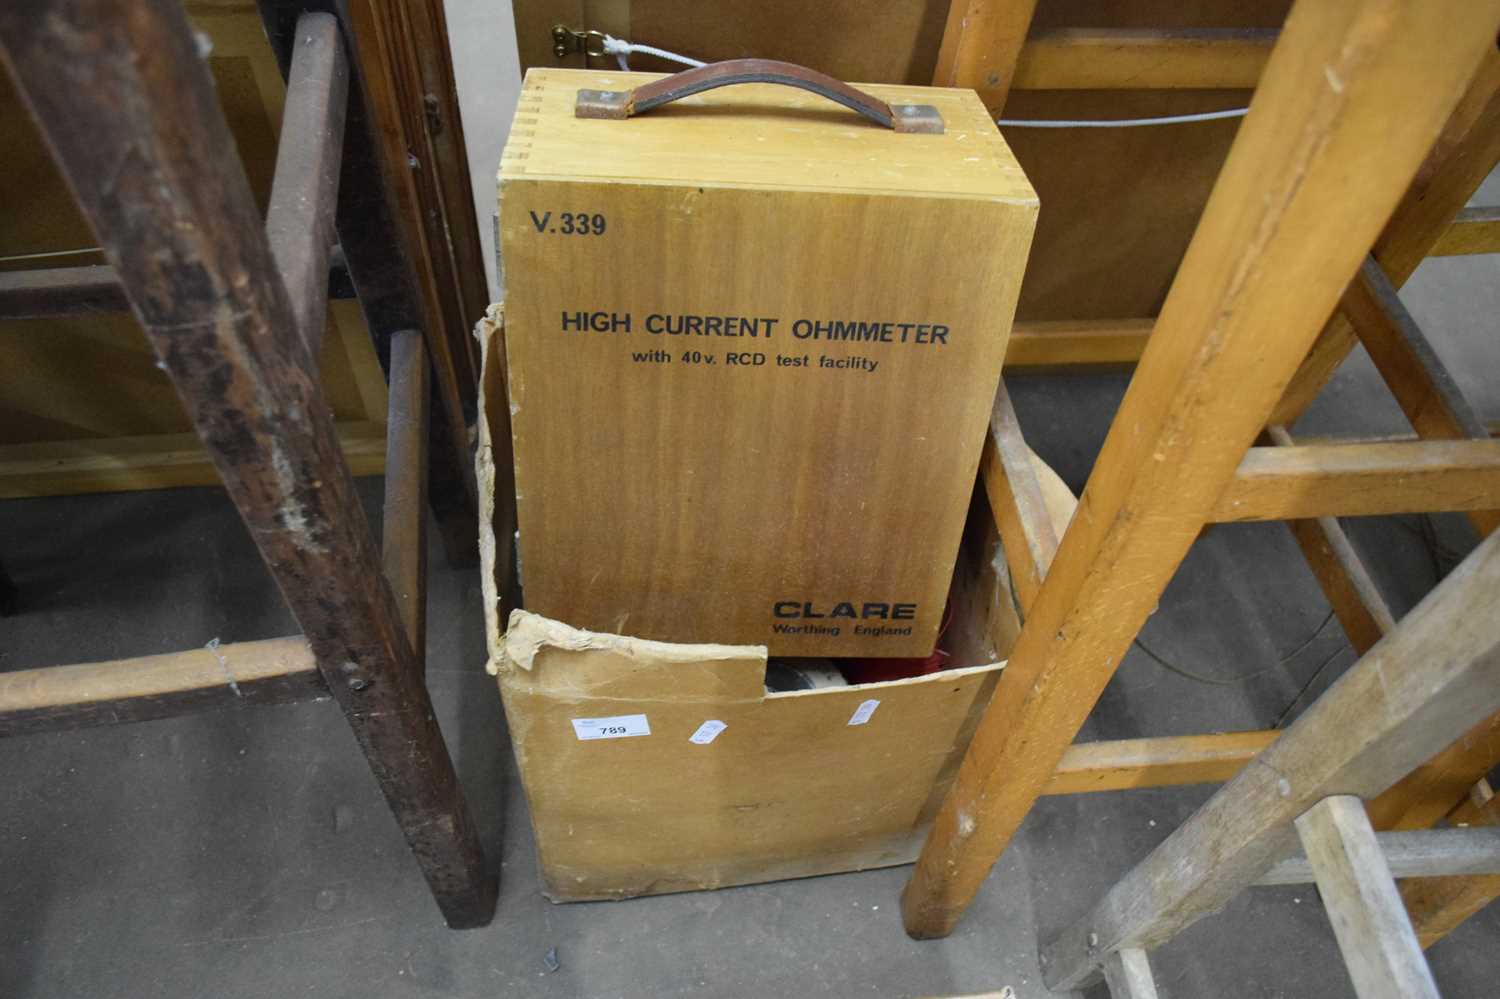 BOXED HIGH CURRENT OHM METER, TOGETHER WITH A QUANTITY OF VARIOUS ROLLED COPPER WIRE